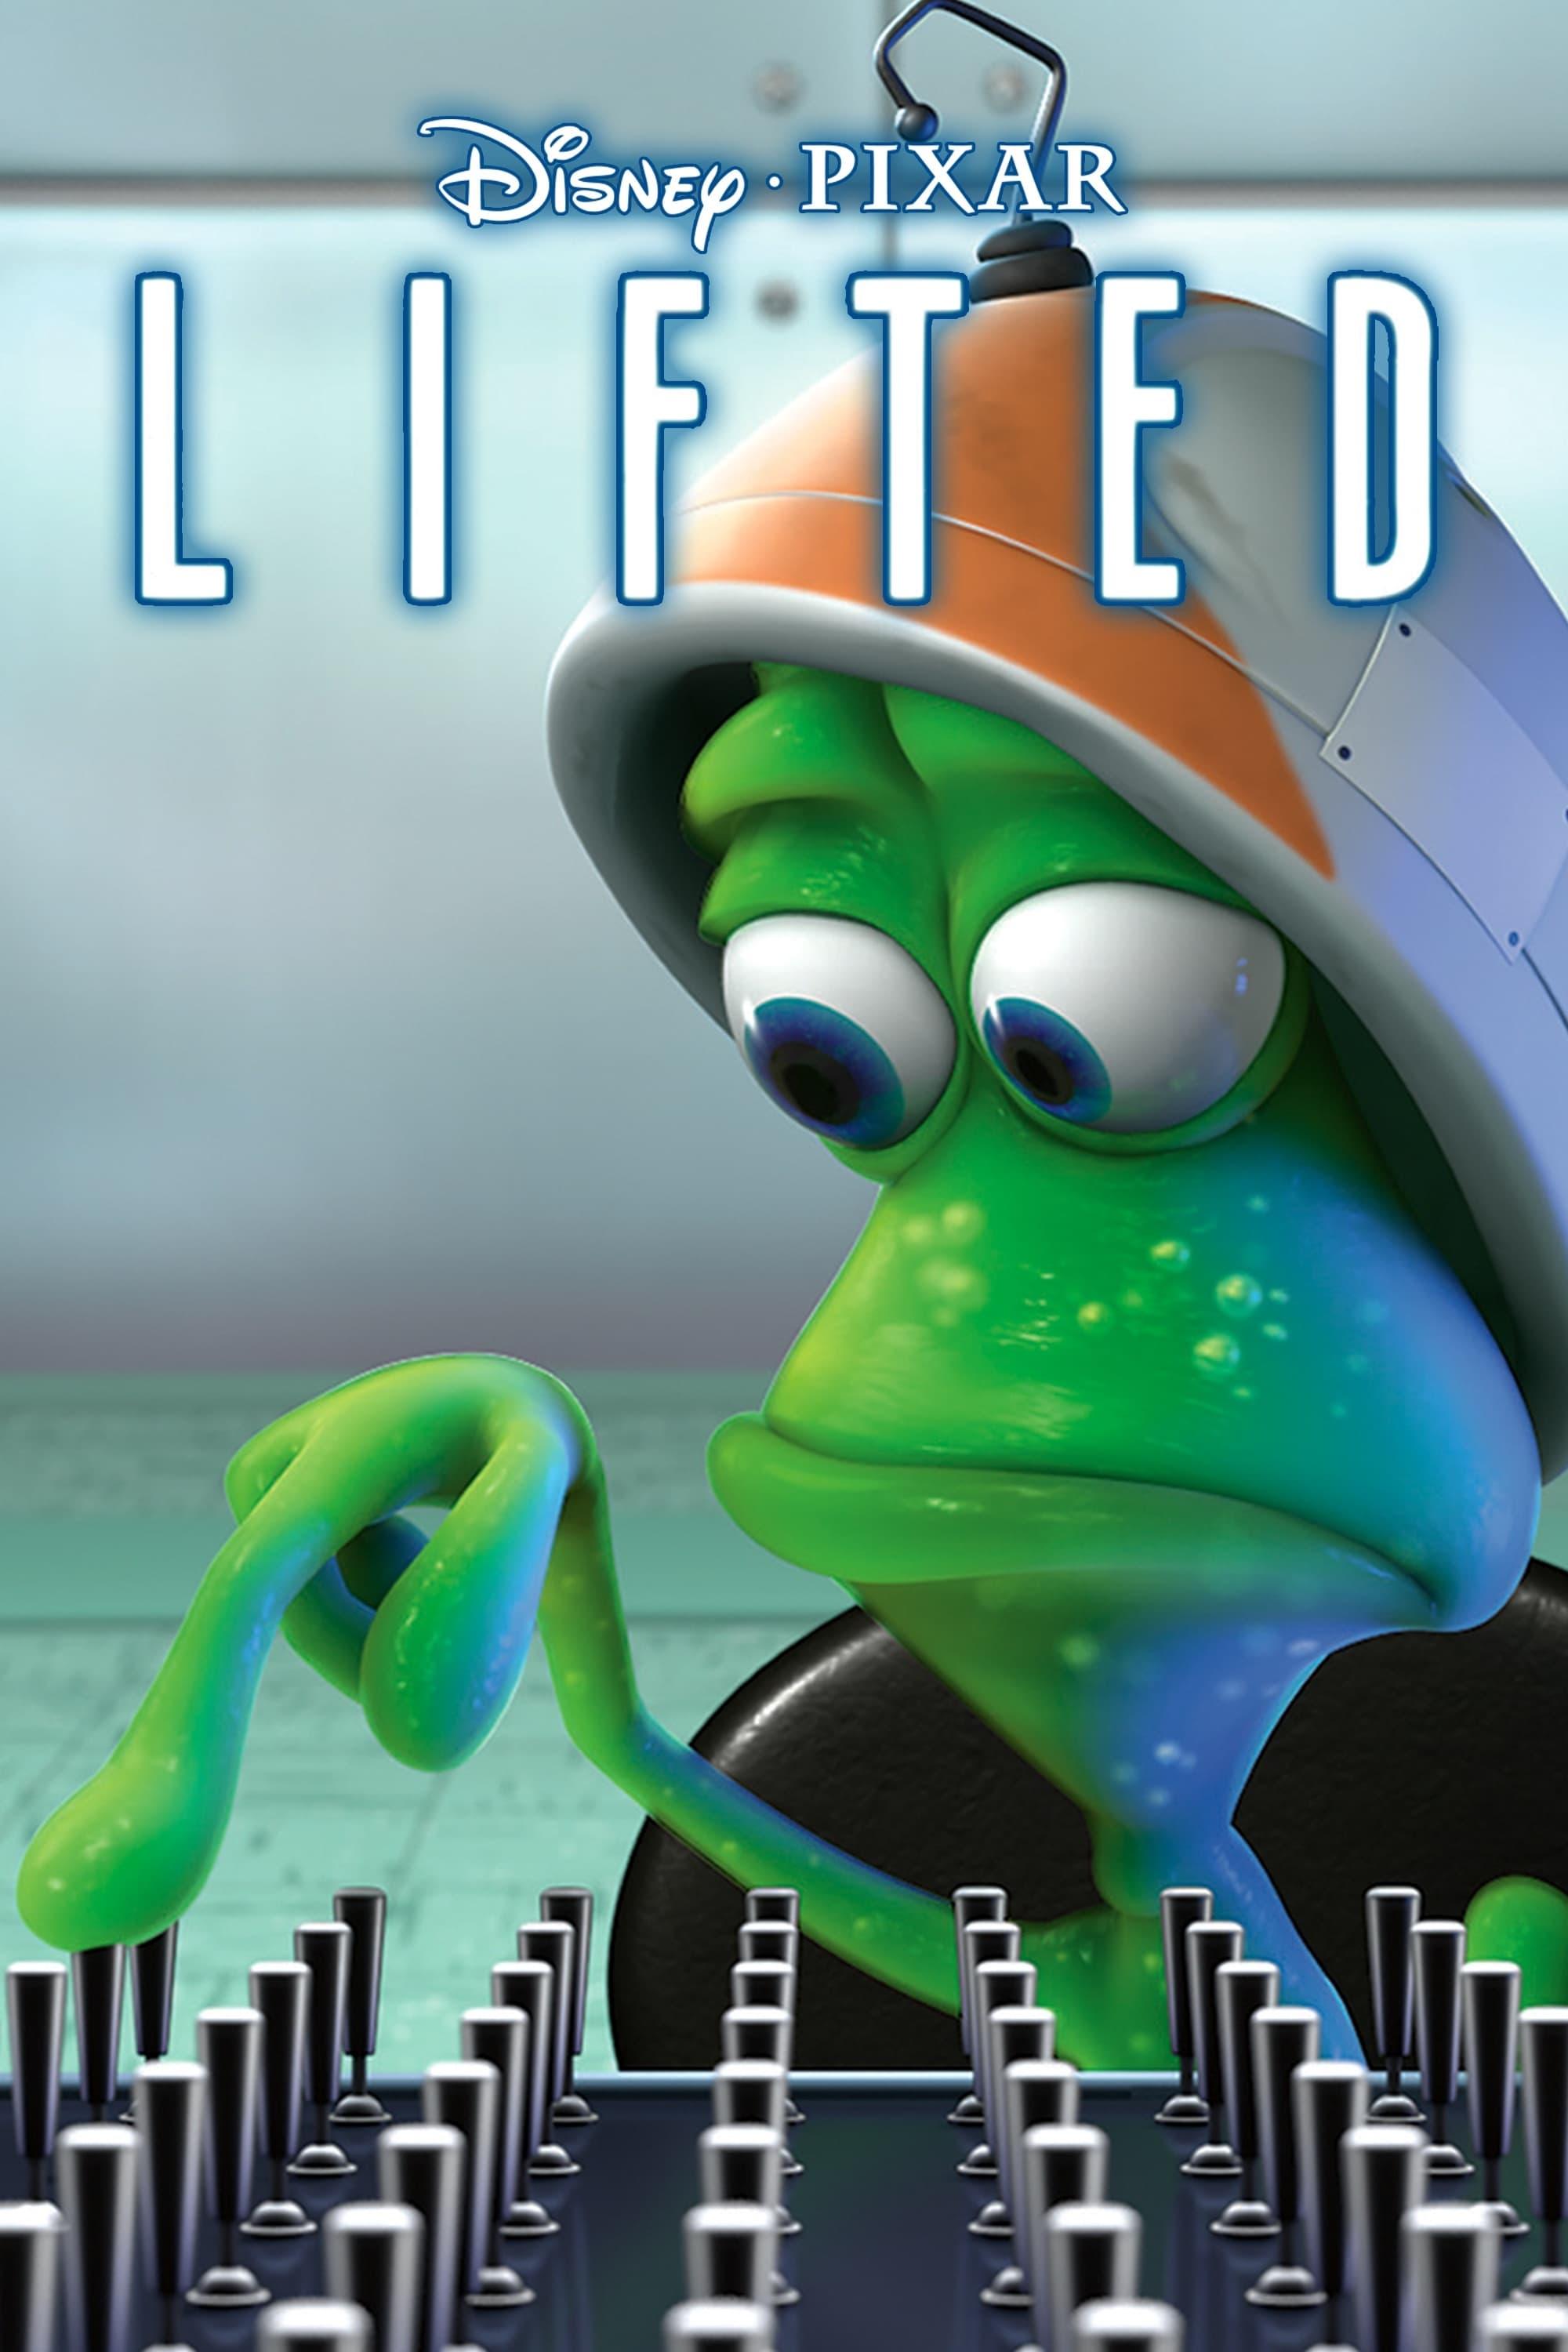 Lifted poster